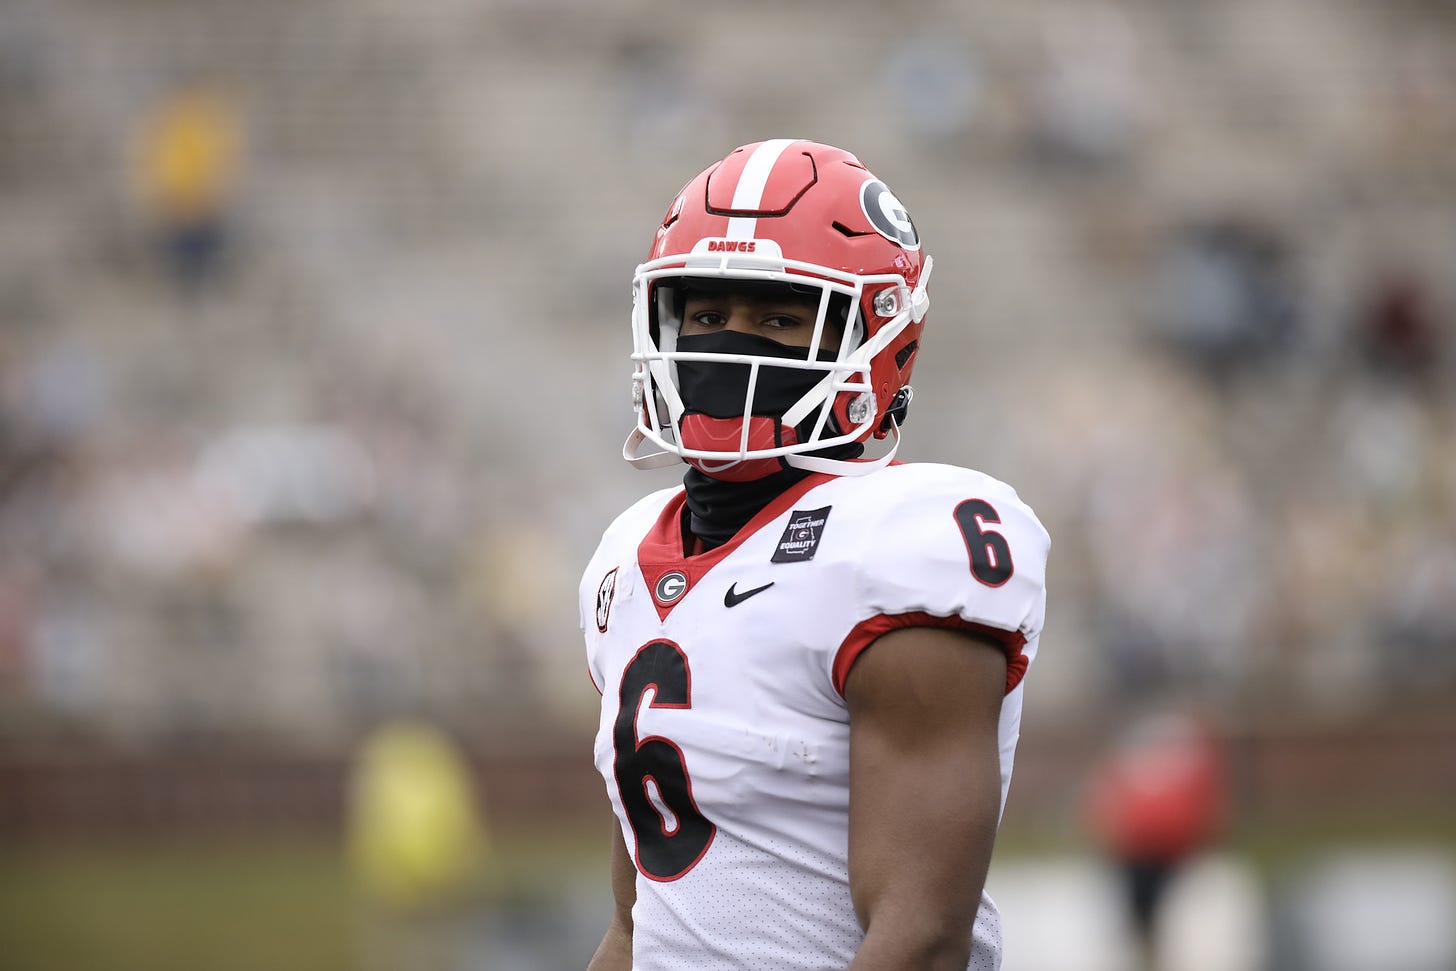 Georgia running back Kenny McIntosh (6) before the Bulldogs’ game against Missouri in Columbia, Mo., on Saturday, Dec. 12, 2020. (Photo by Cassie Florido)